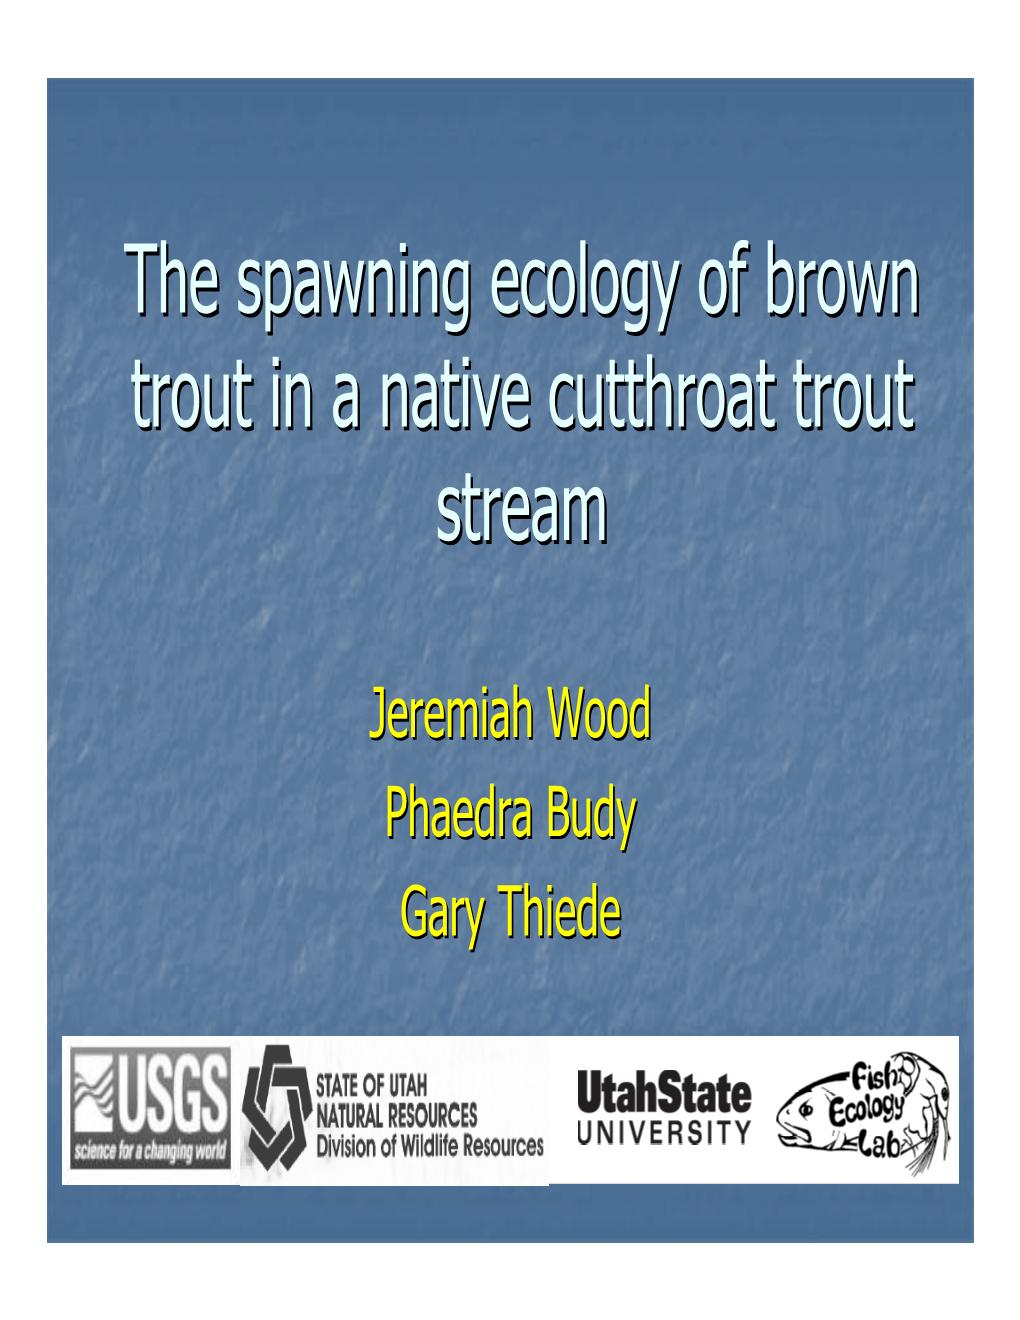 The Spawning Ecology of Brown Trout in a Native Cutthroat Trout Stream